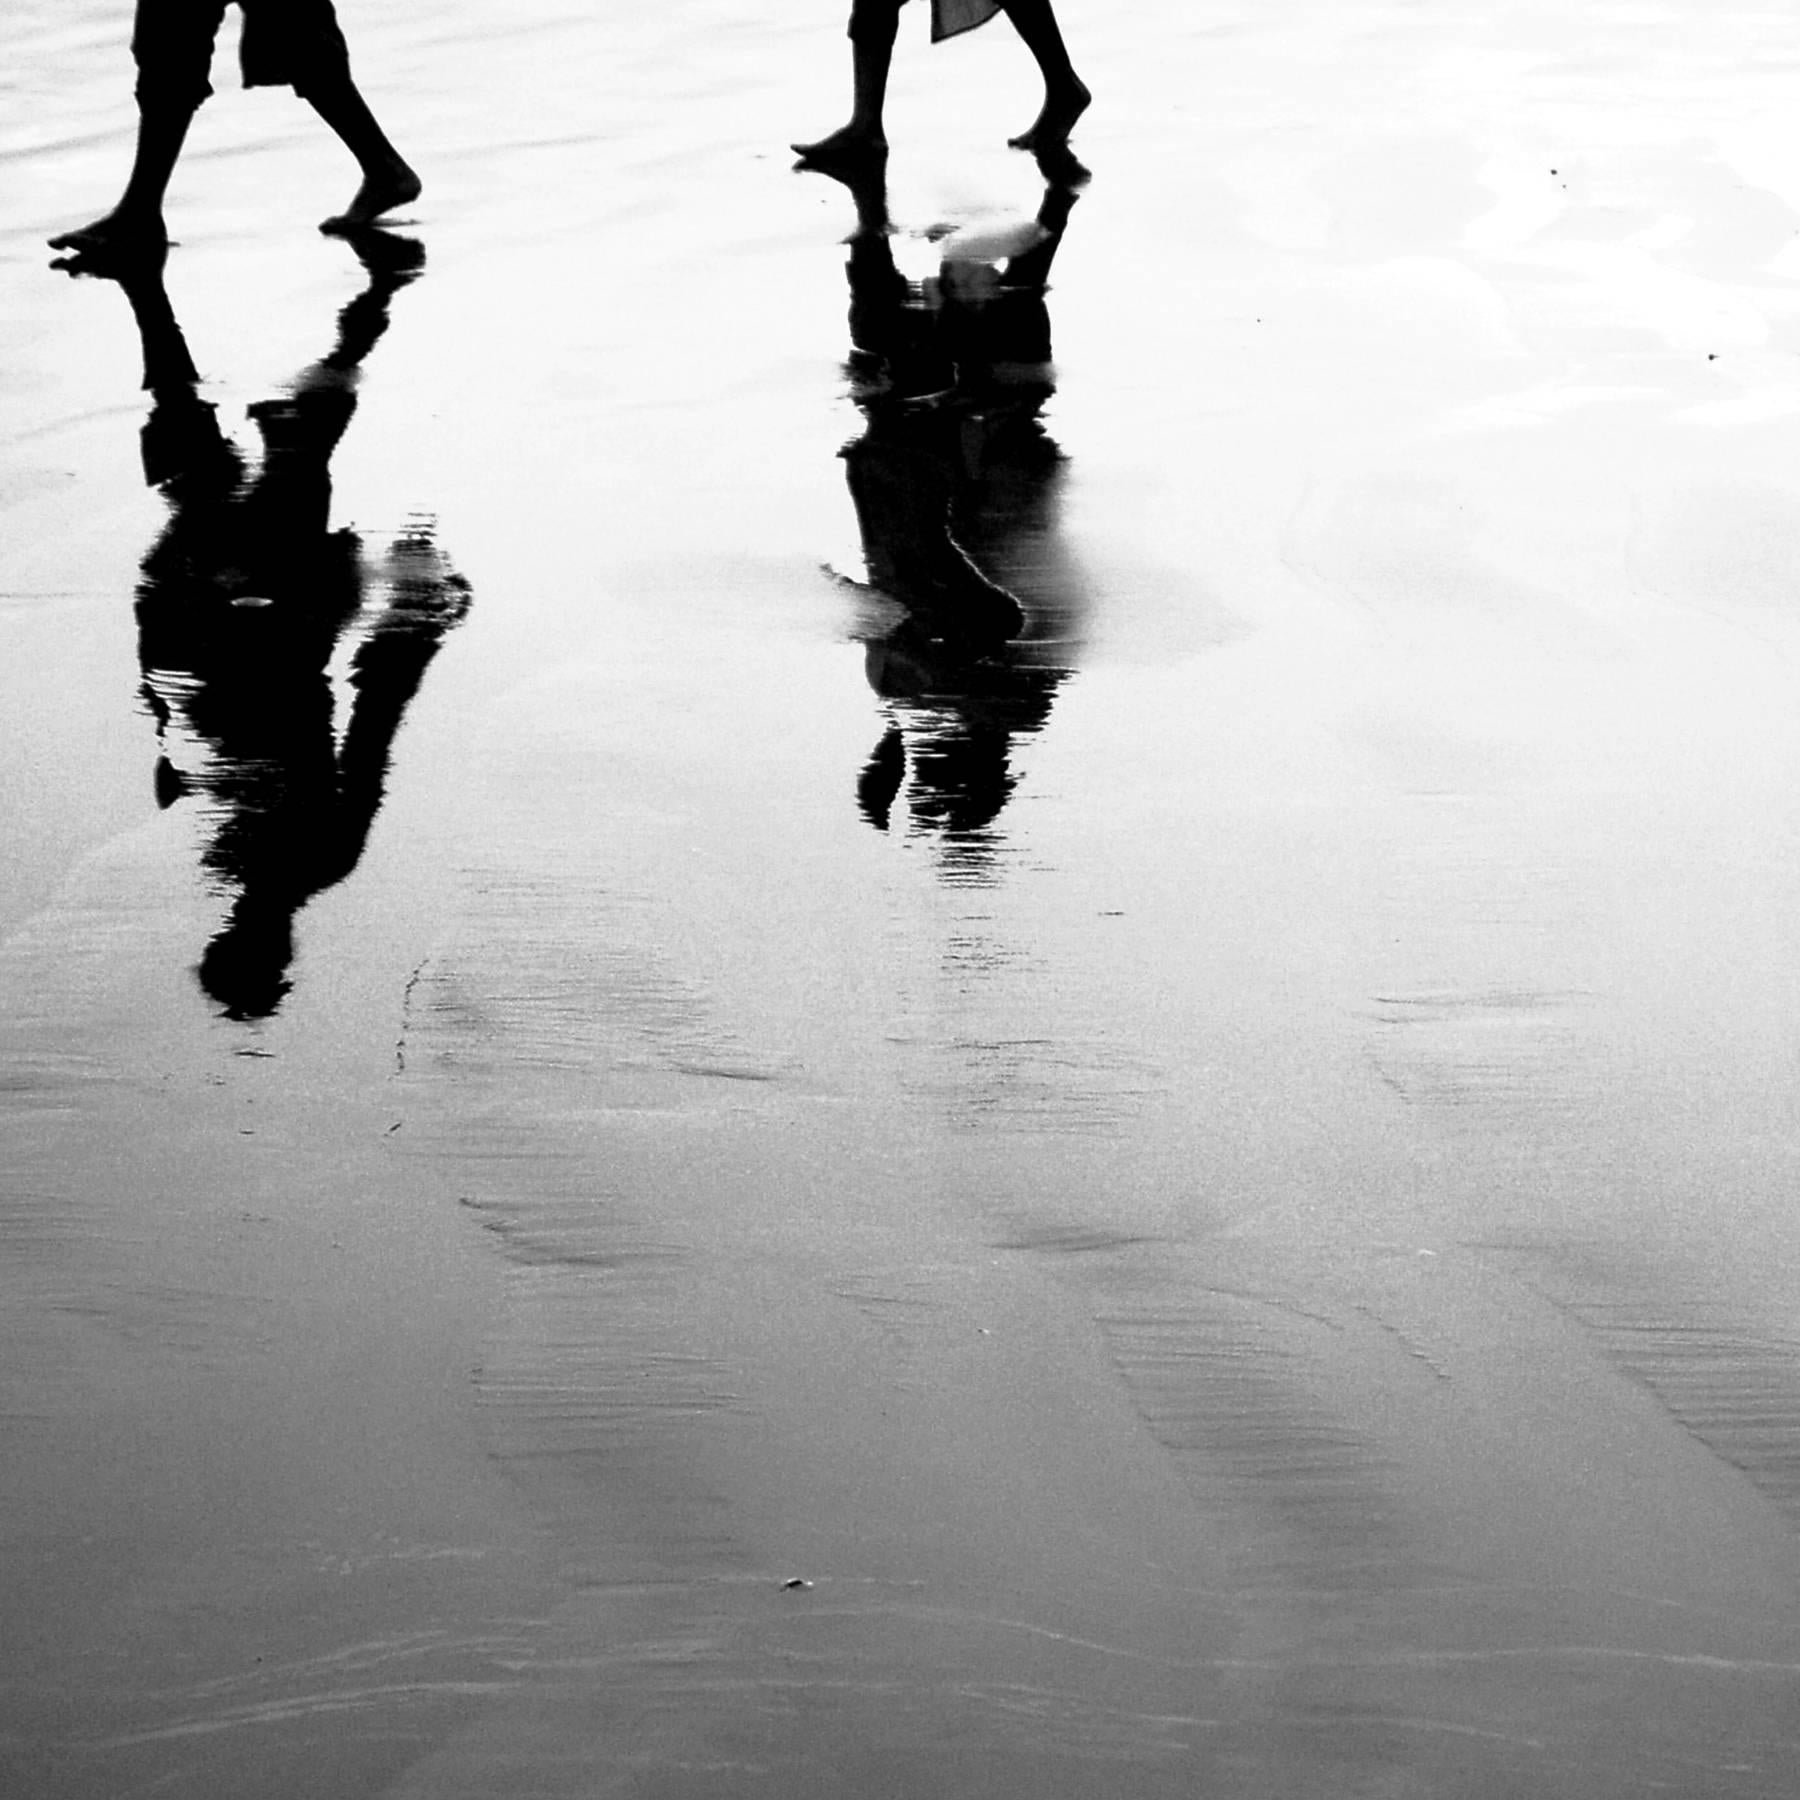 Walking in a Sea Beach, Black & White Photography by Indian Artist "In Stock"